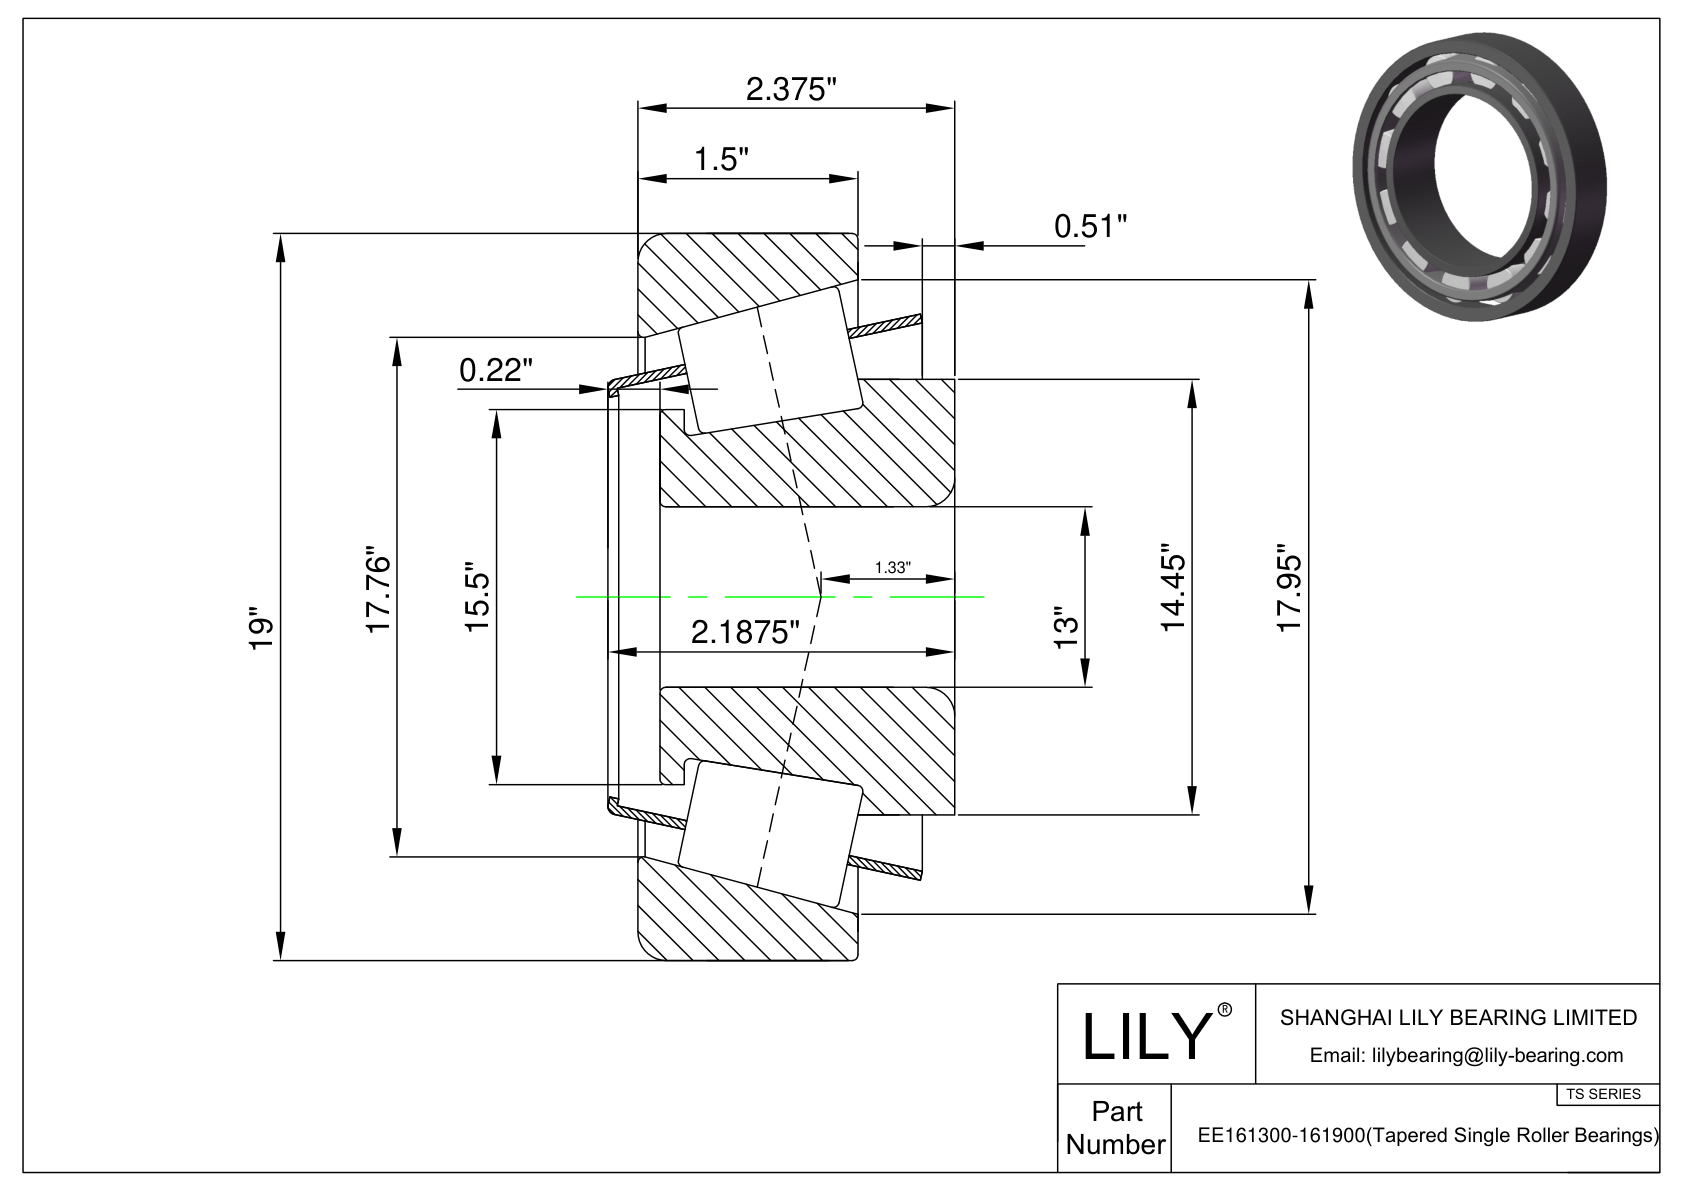 EE161300-161900 TS (Tapered Single Roller Bearings) (Imperial) cad drawing